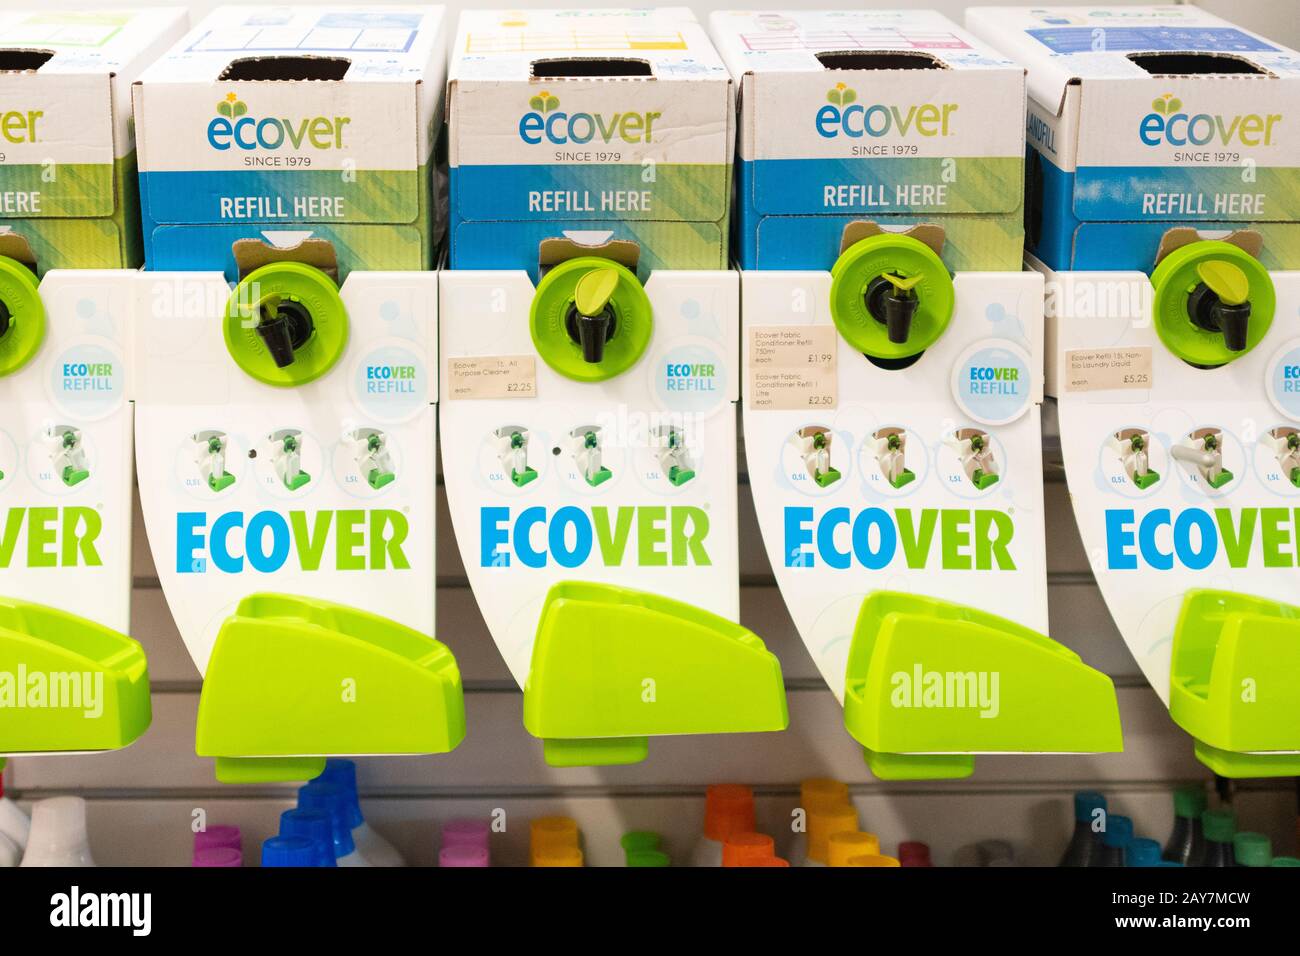 Ecover refill station and environmentally friendly green products at Cross Lanes Organic Farm Shop, County Durham, UK Stock Photo